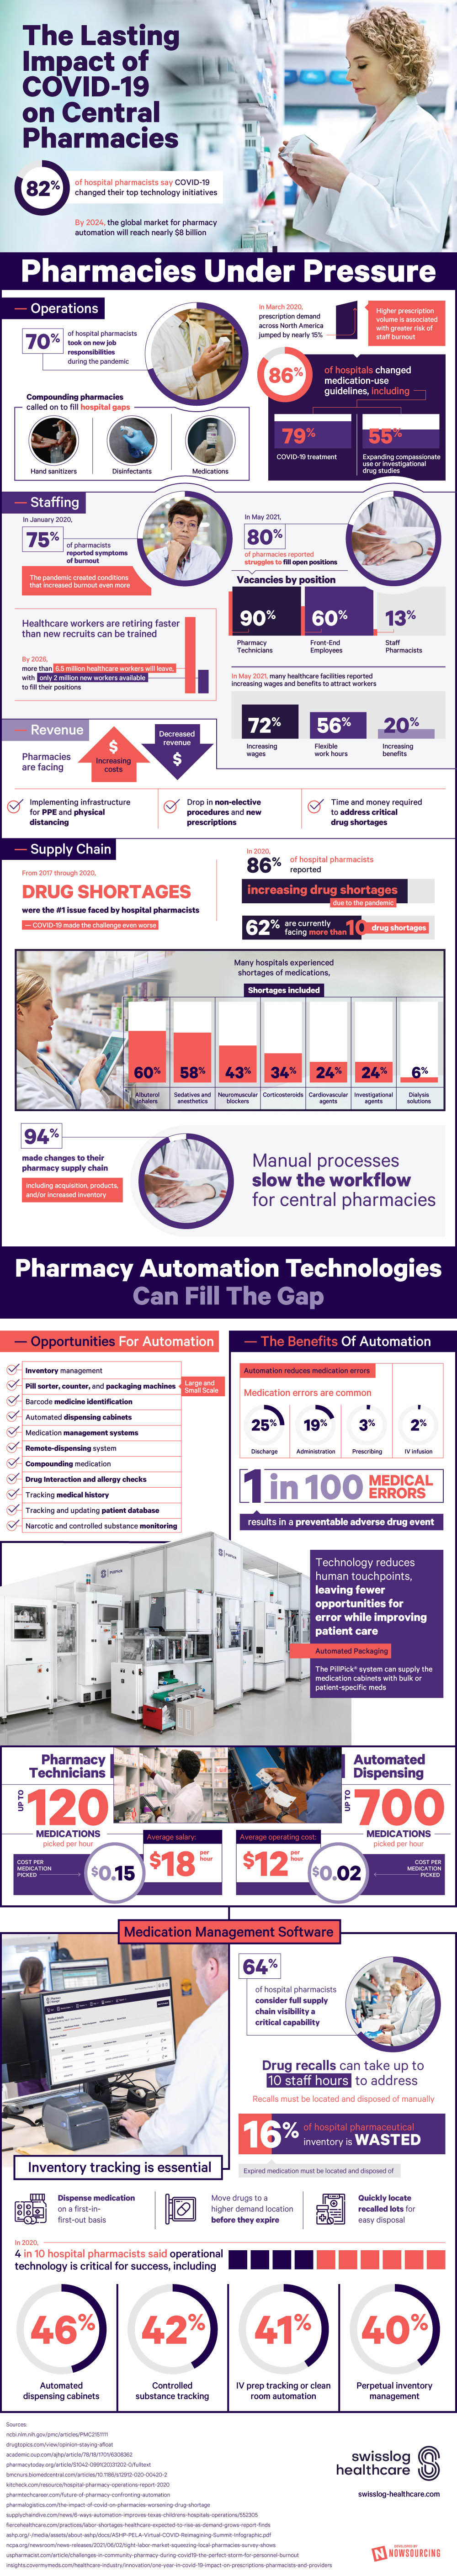 Why Central Pharmacies Matter